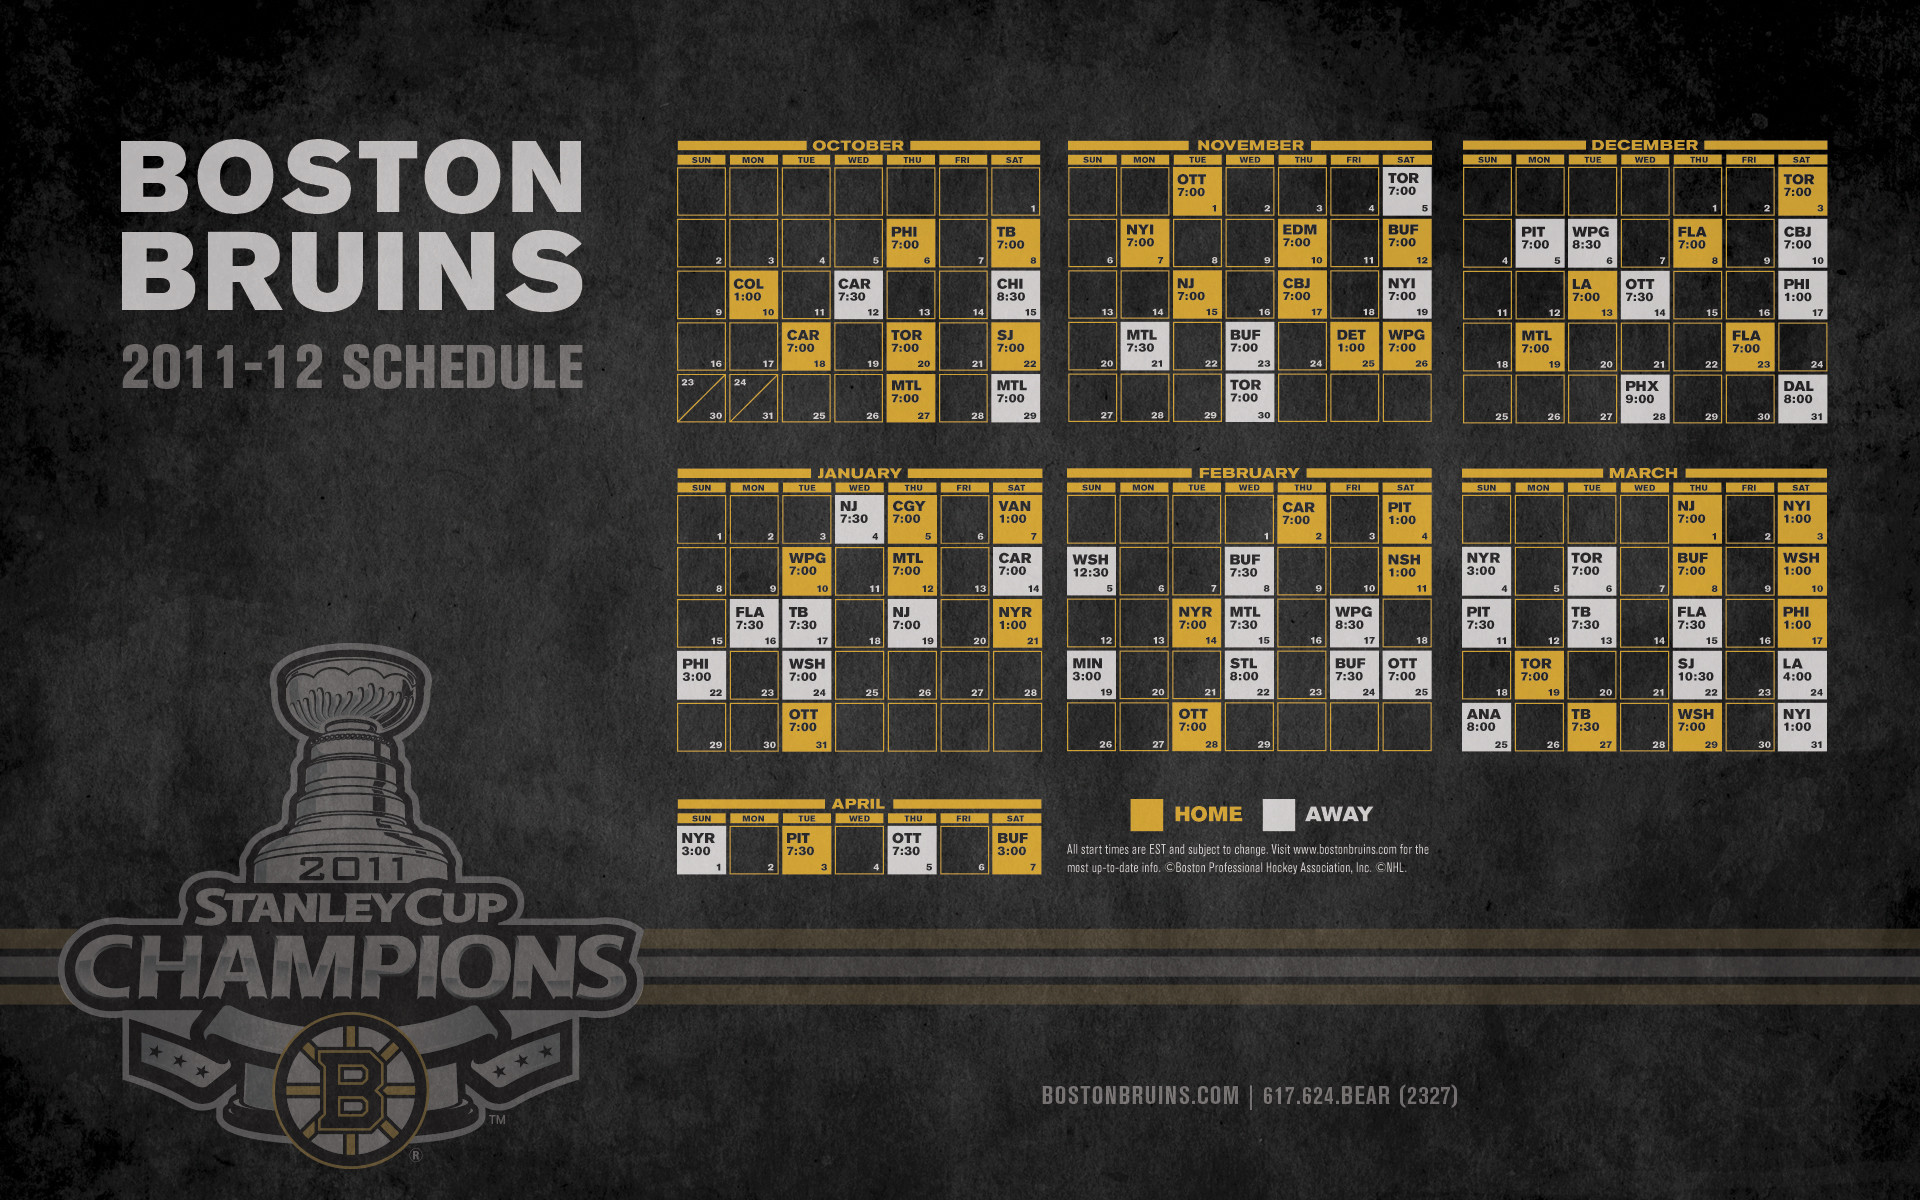 1920x1200 Boston Bruins images Bruins 2011-12 Schedule HD wallpaper and background  photos